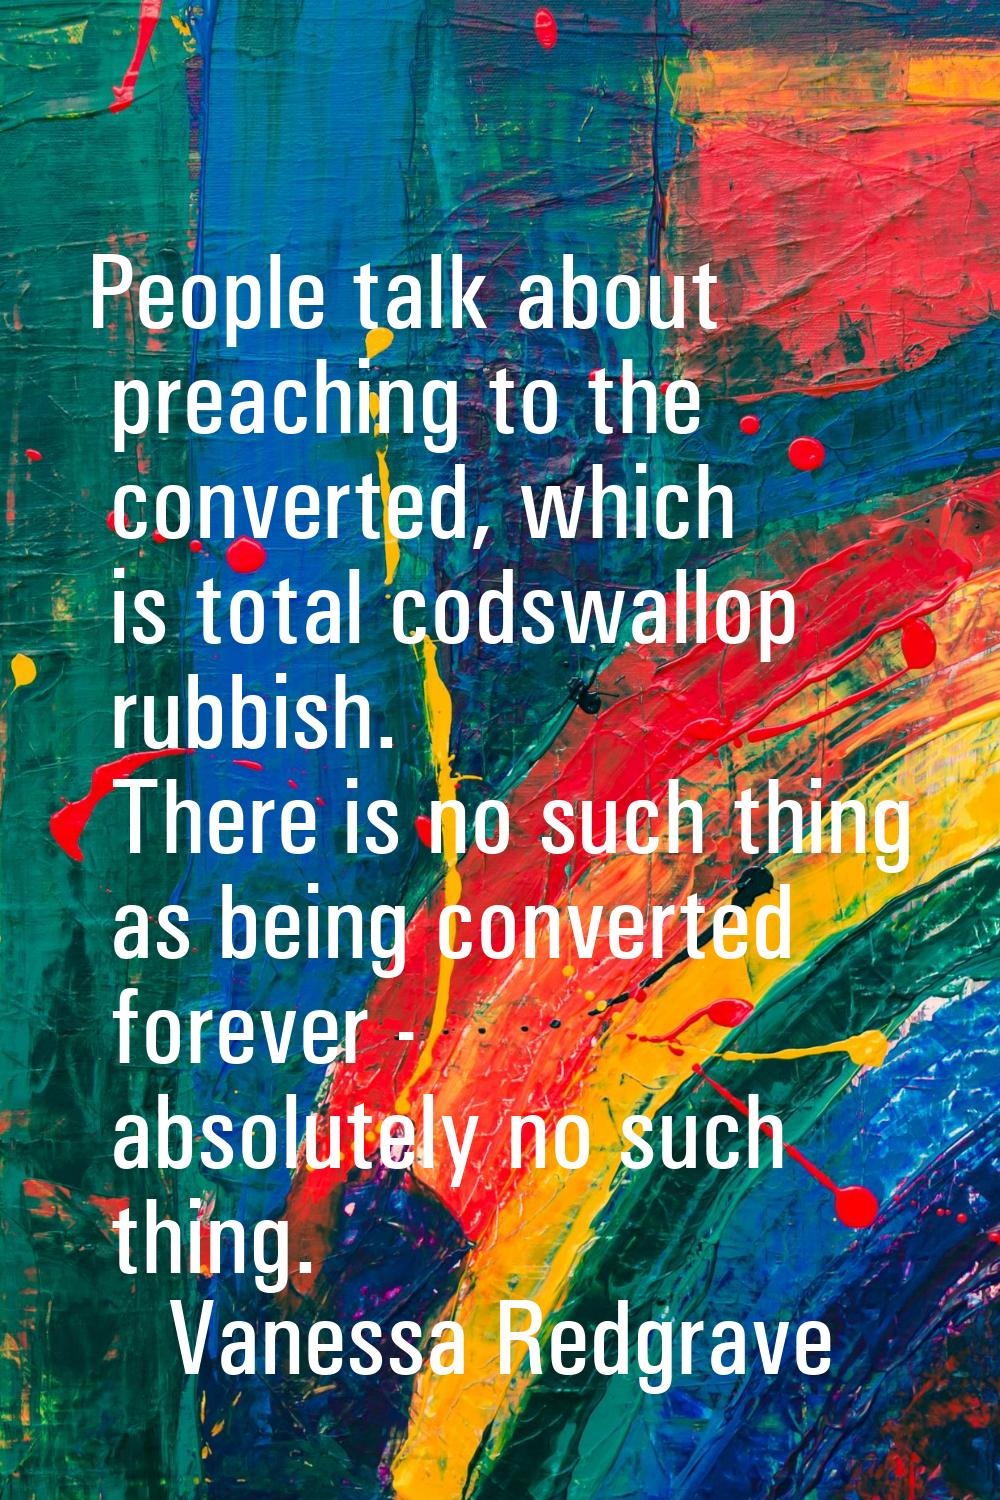 People talk about preaching to the converted, which is total codswallop rubbish. There is no such t